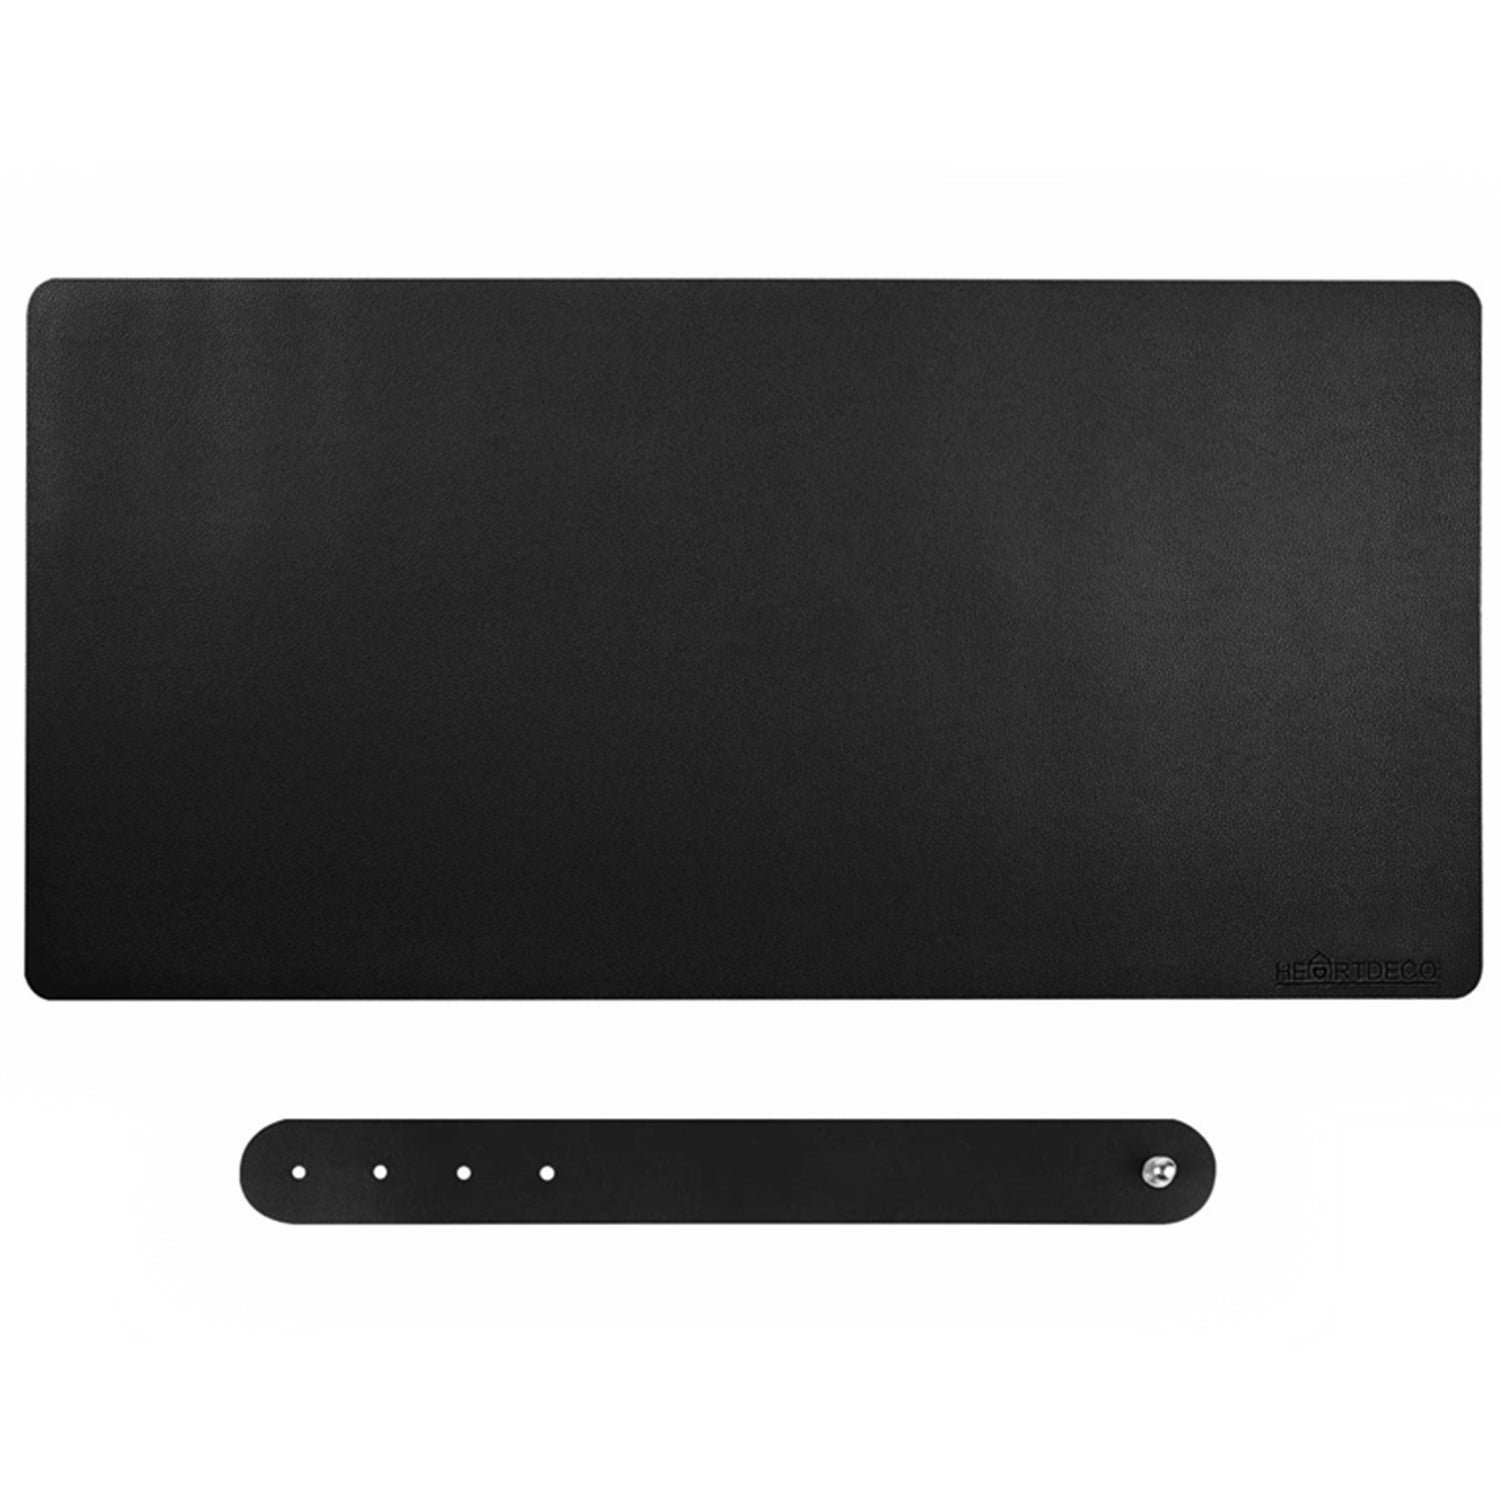 Large PU Leather Desk Mouse Pad Comfortable Writing Mat- Black